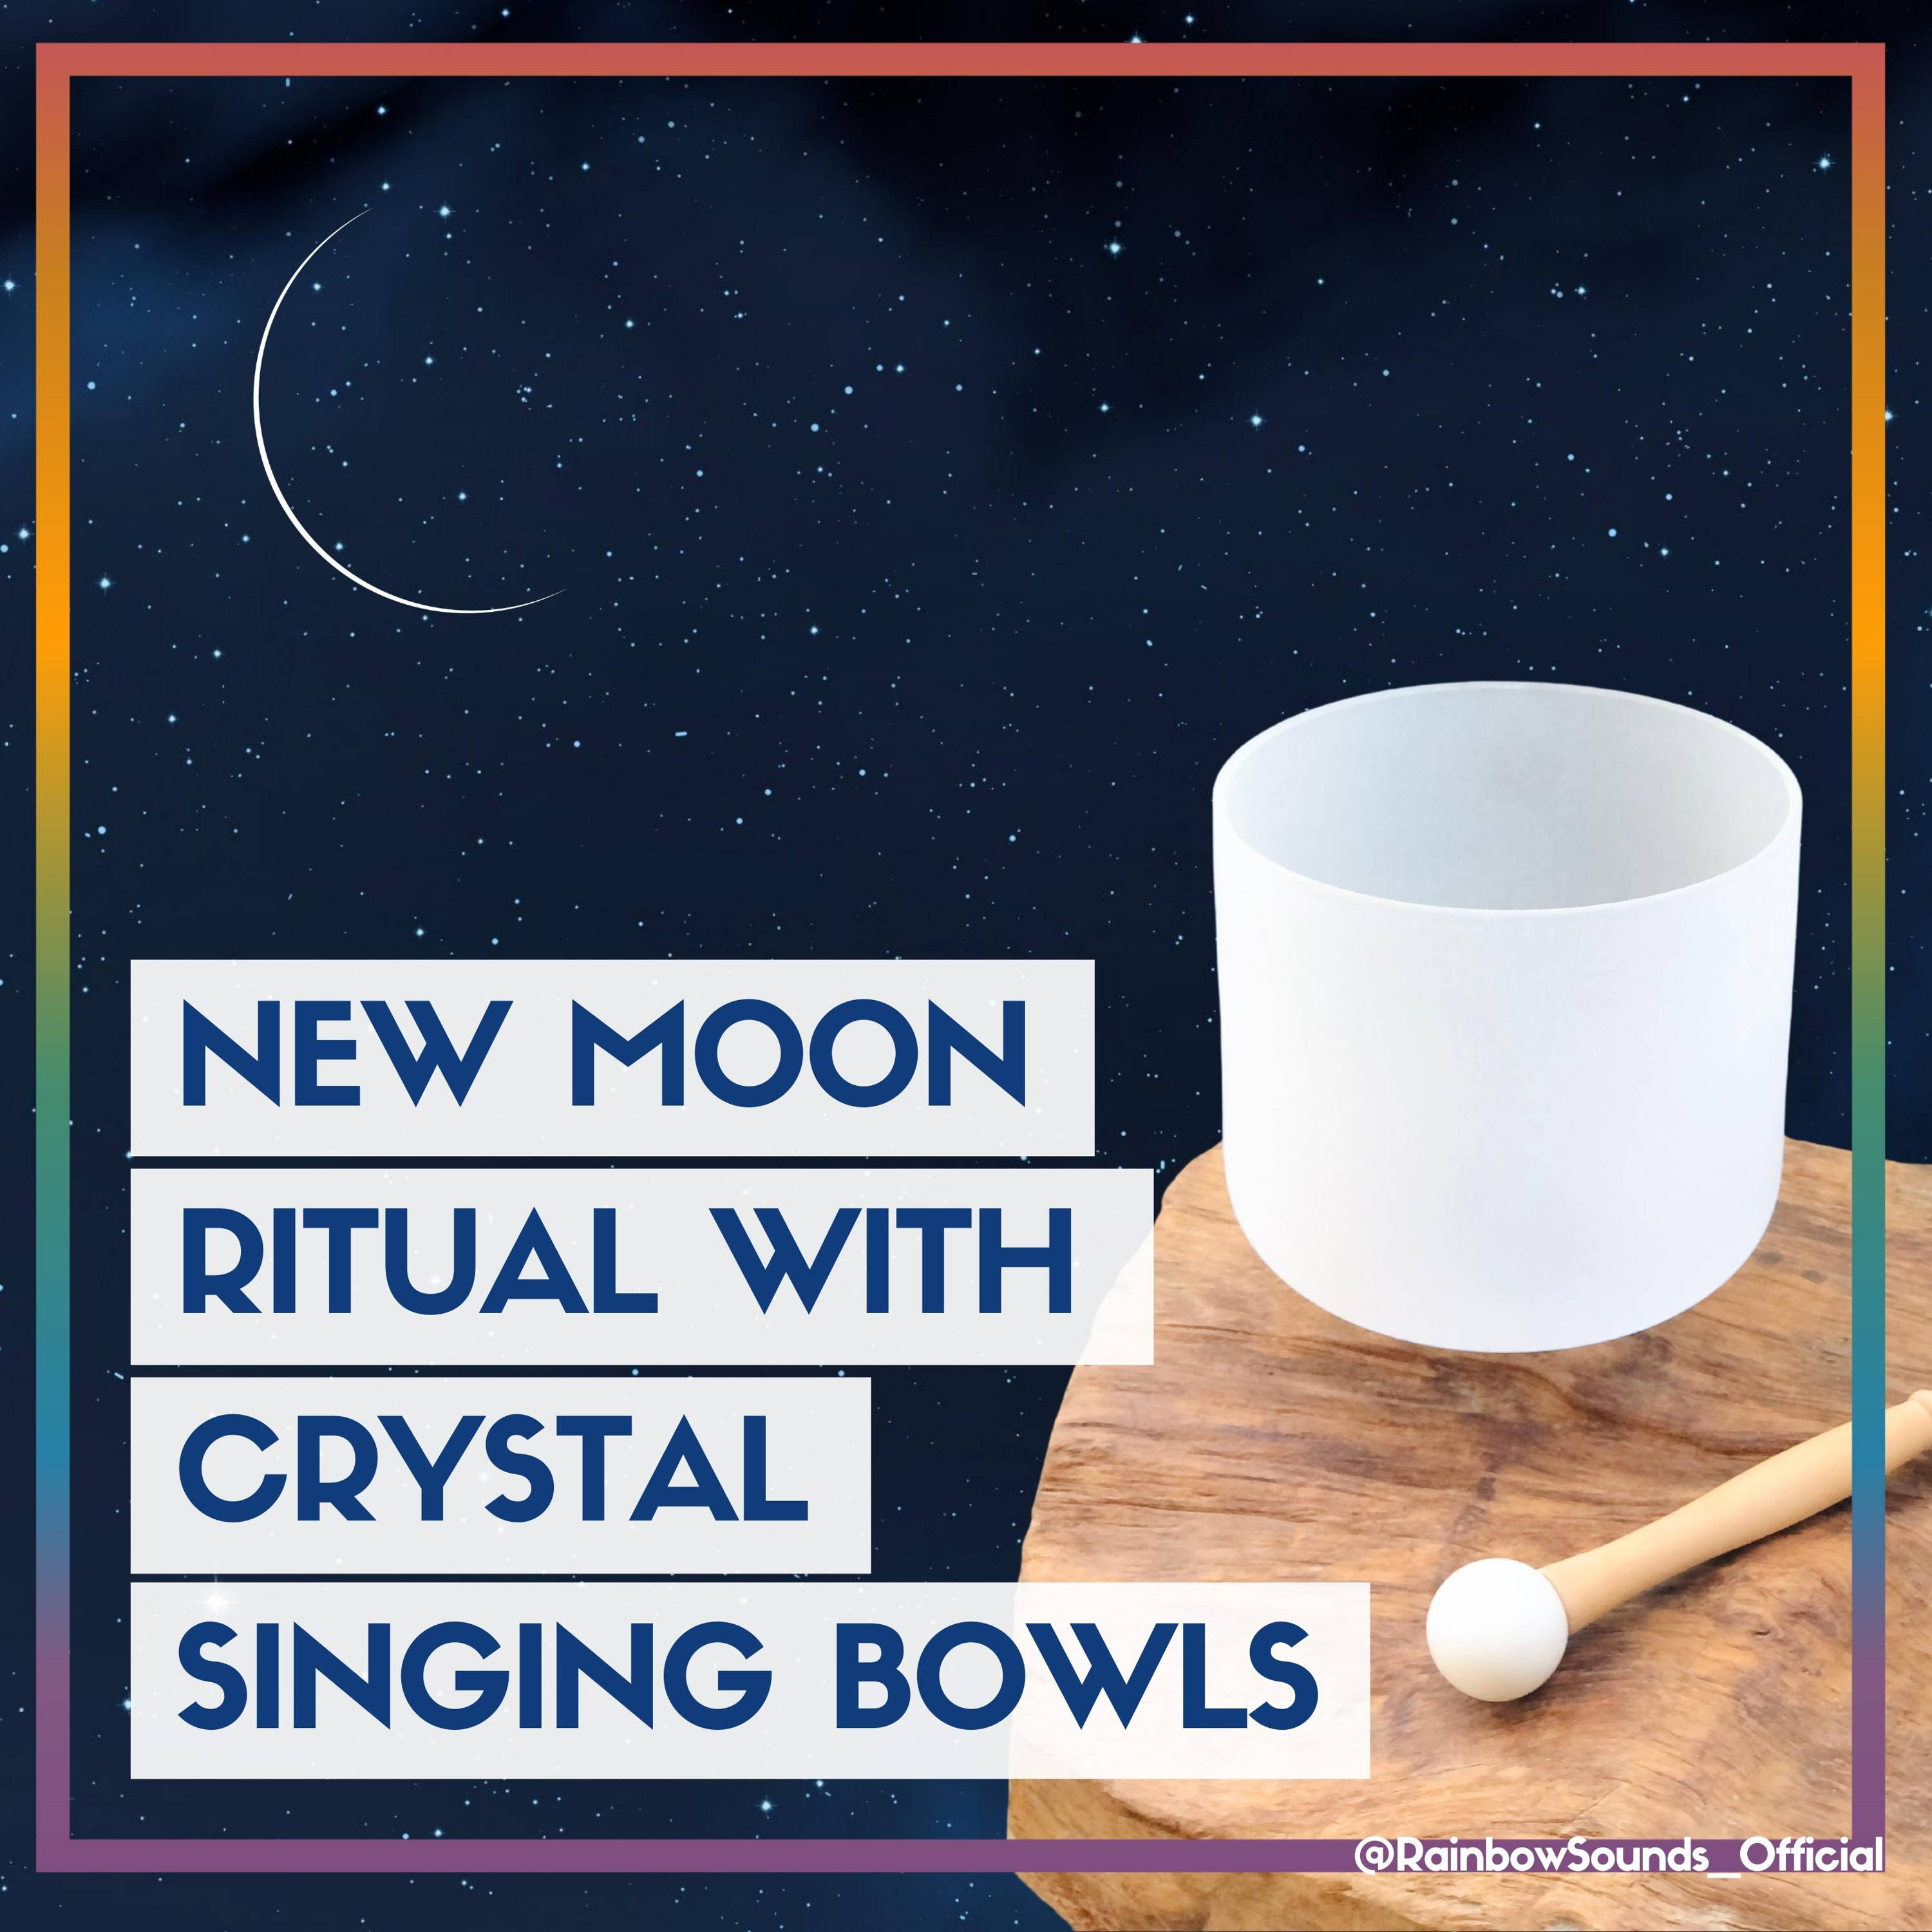 New Moon Ritual with Crystal Singing Bowls